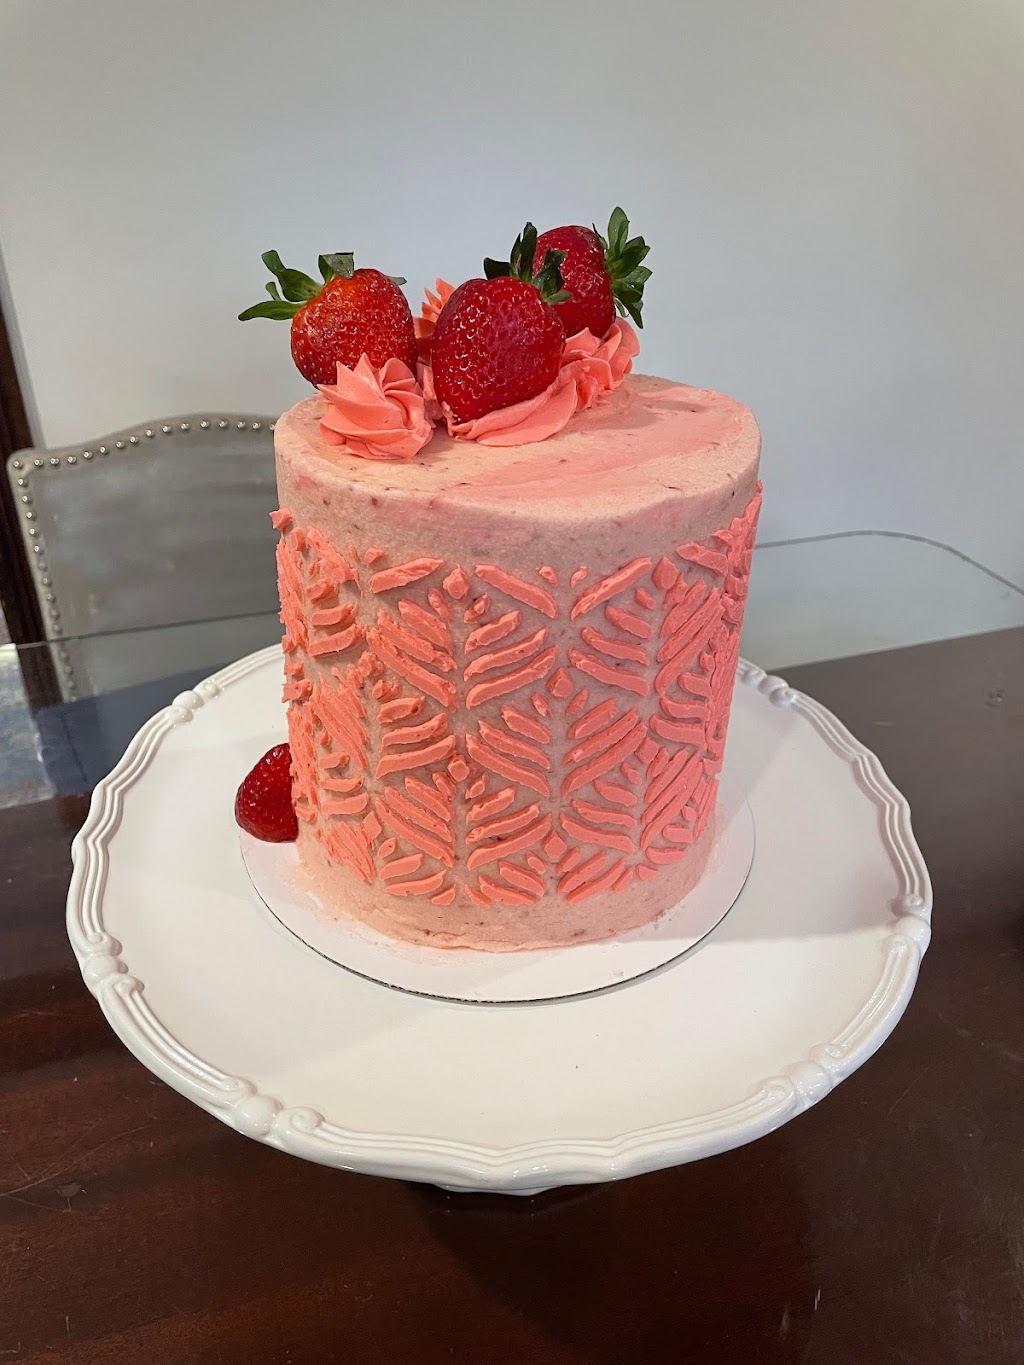 Baked by Warda | 136 Colonial Springs Rd, Wheatley Heights, NY 11798 | Phone: (347) 458-4500